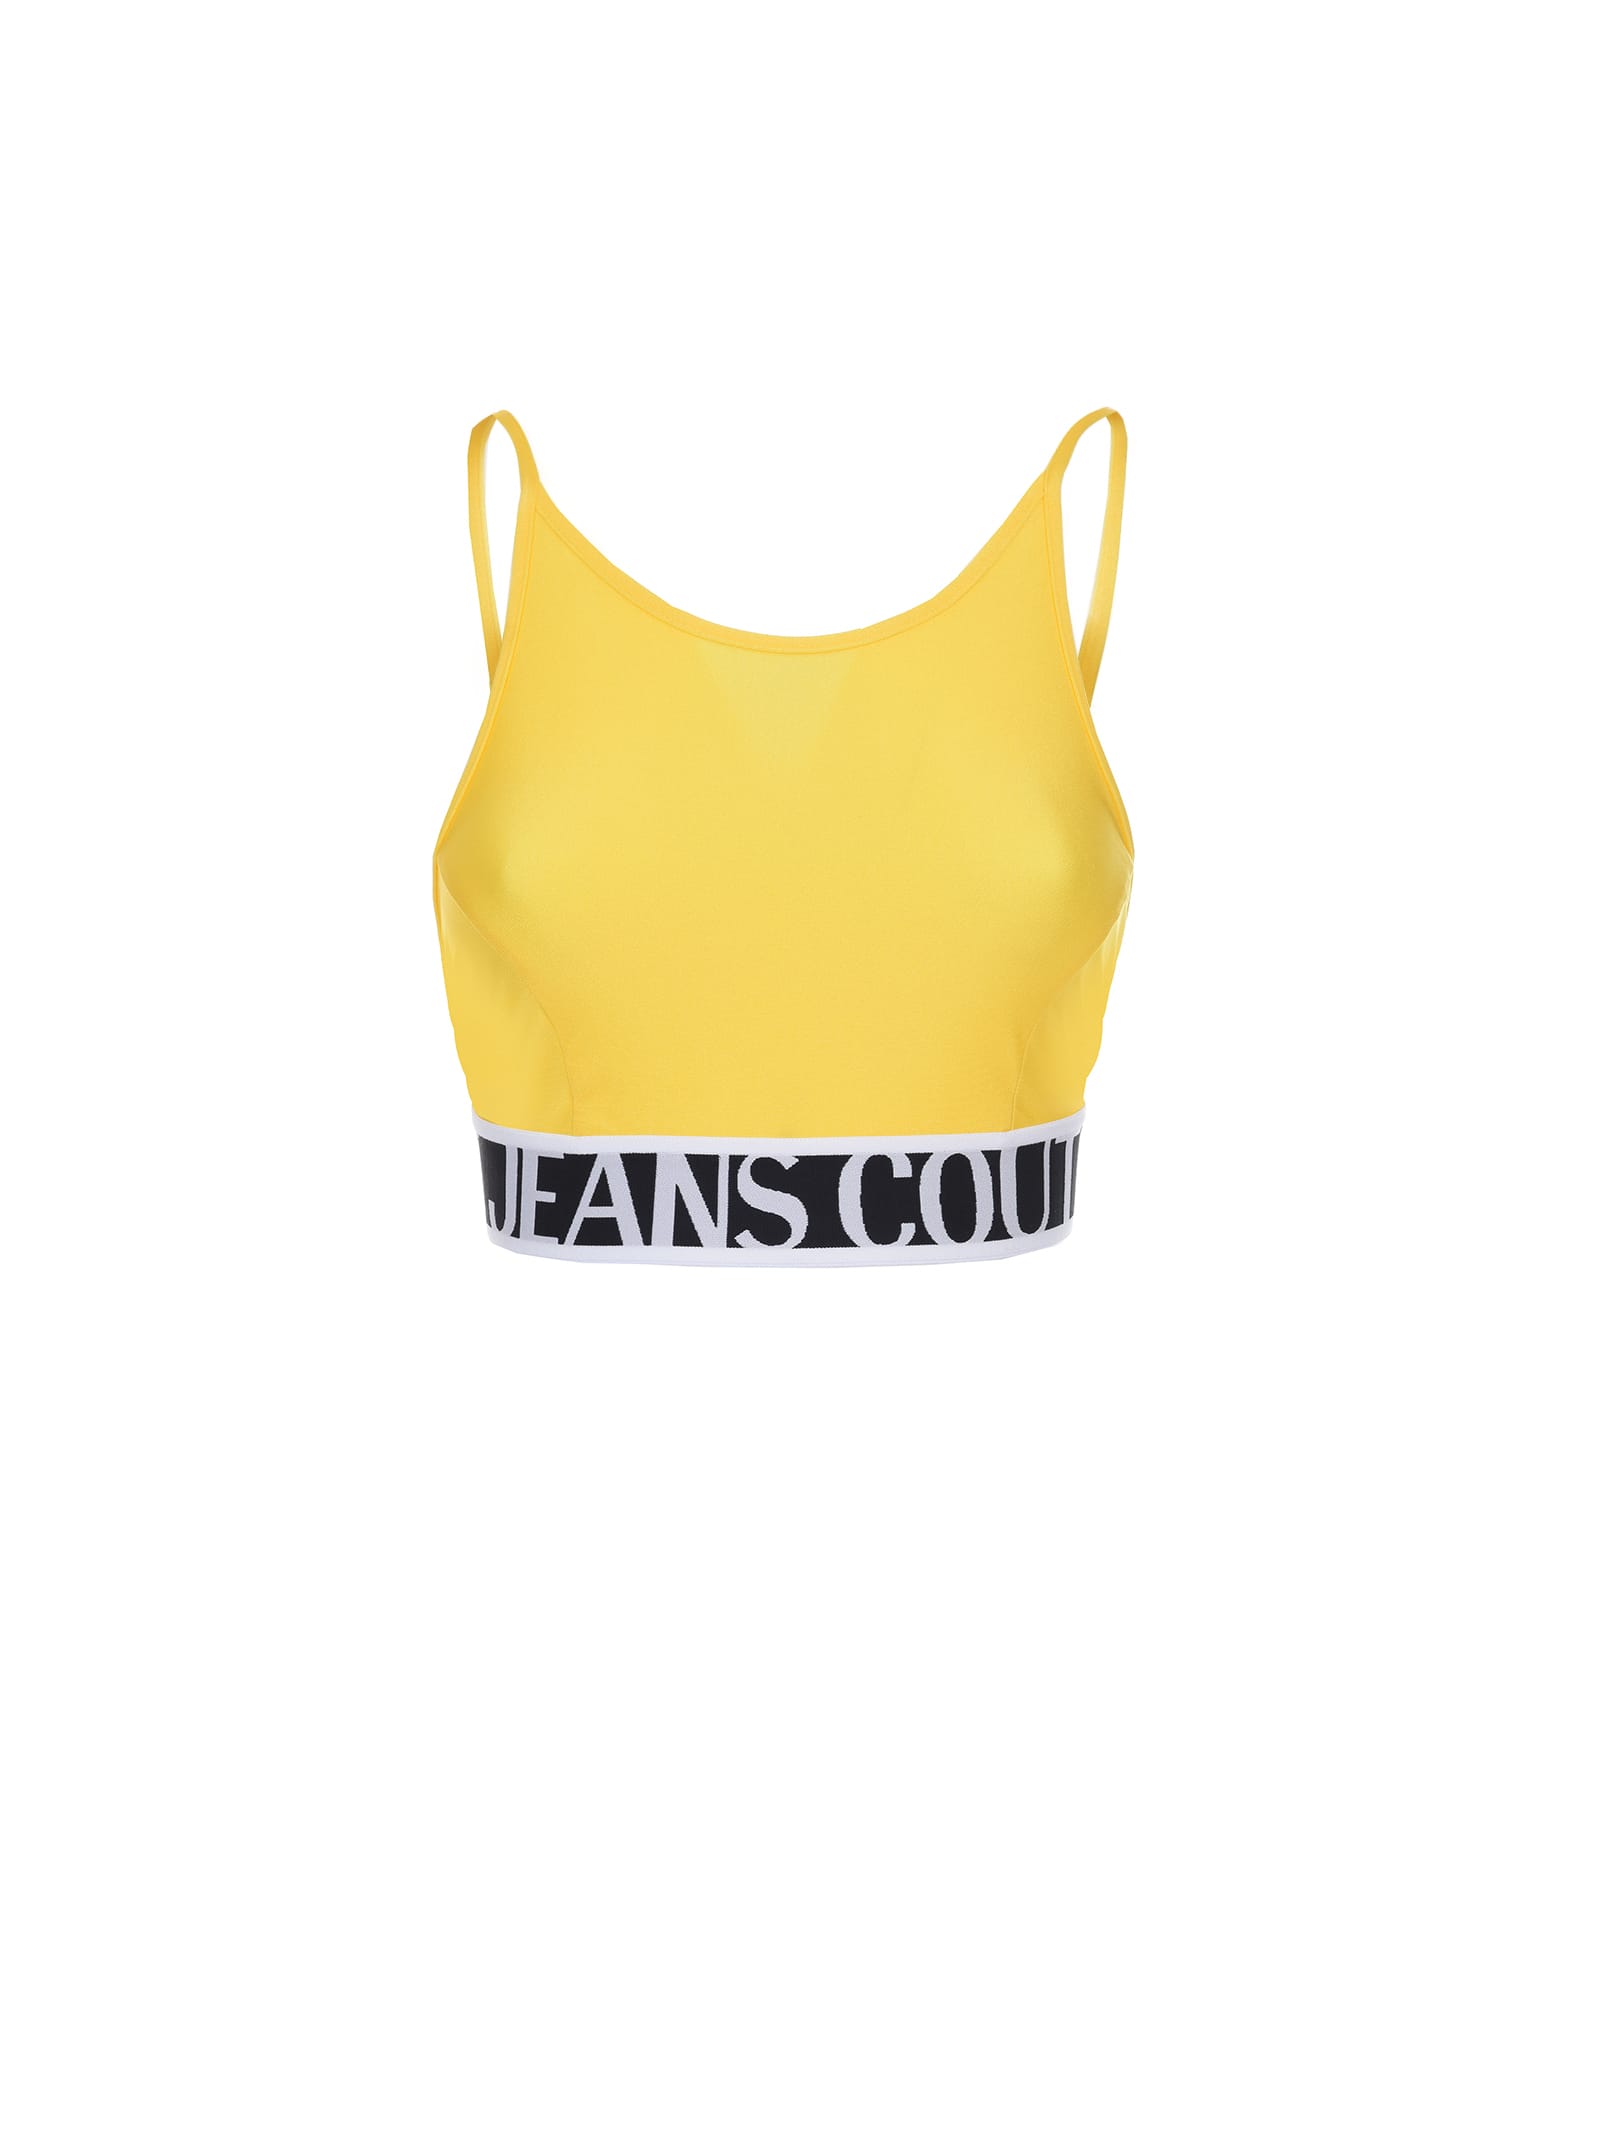 Versace Jeans Couture Solid Yellow Crop Top